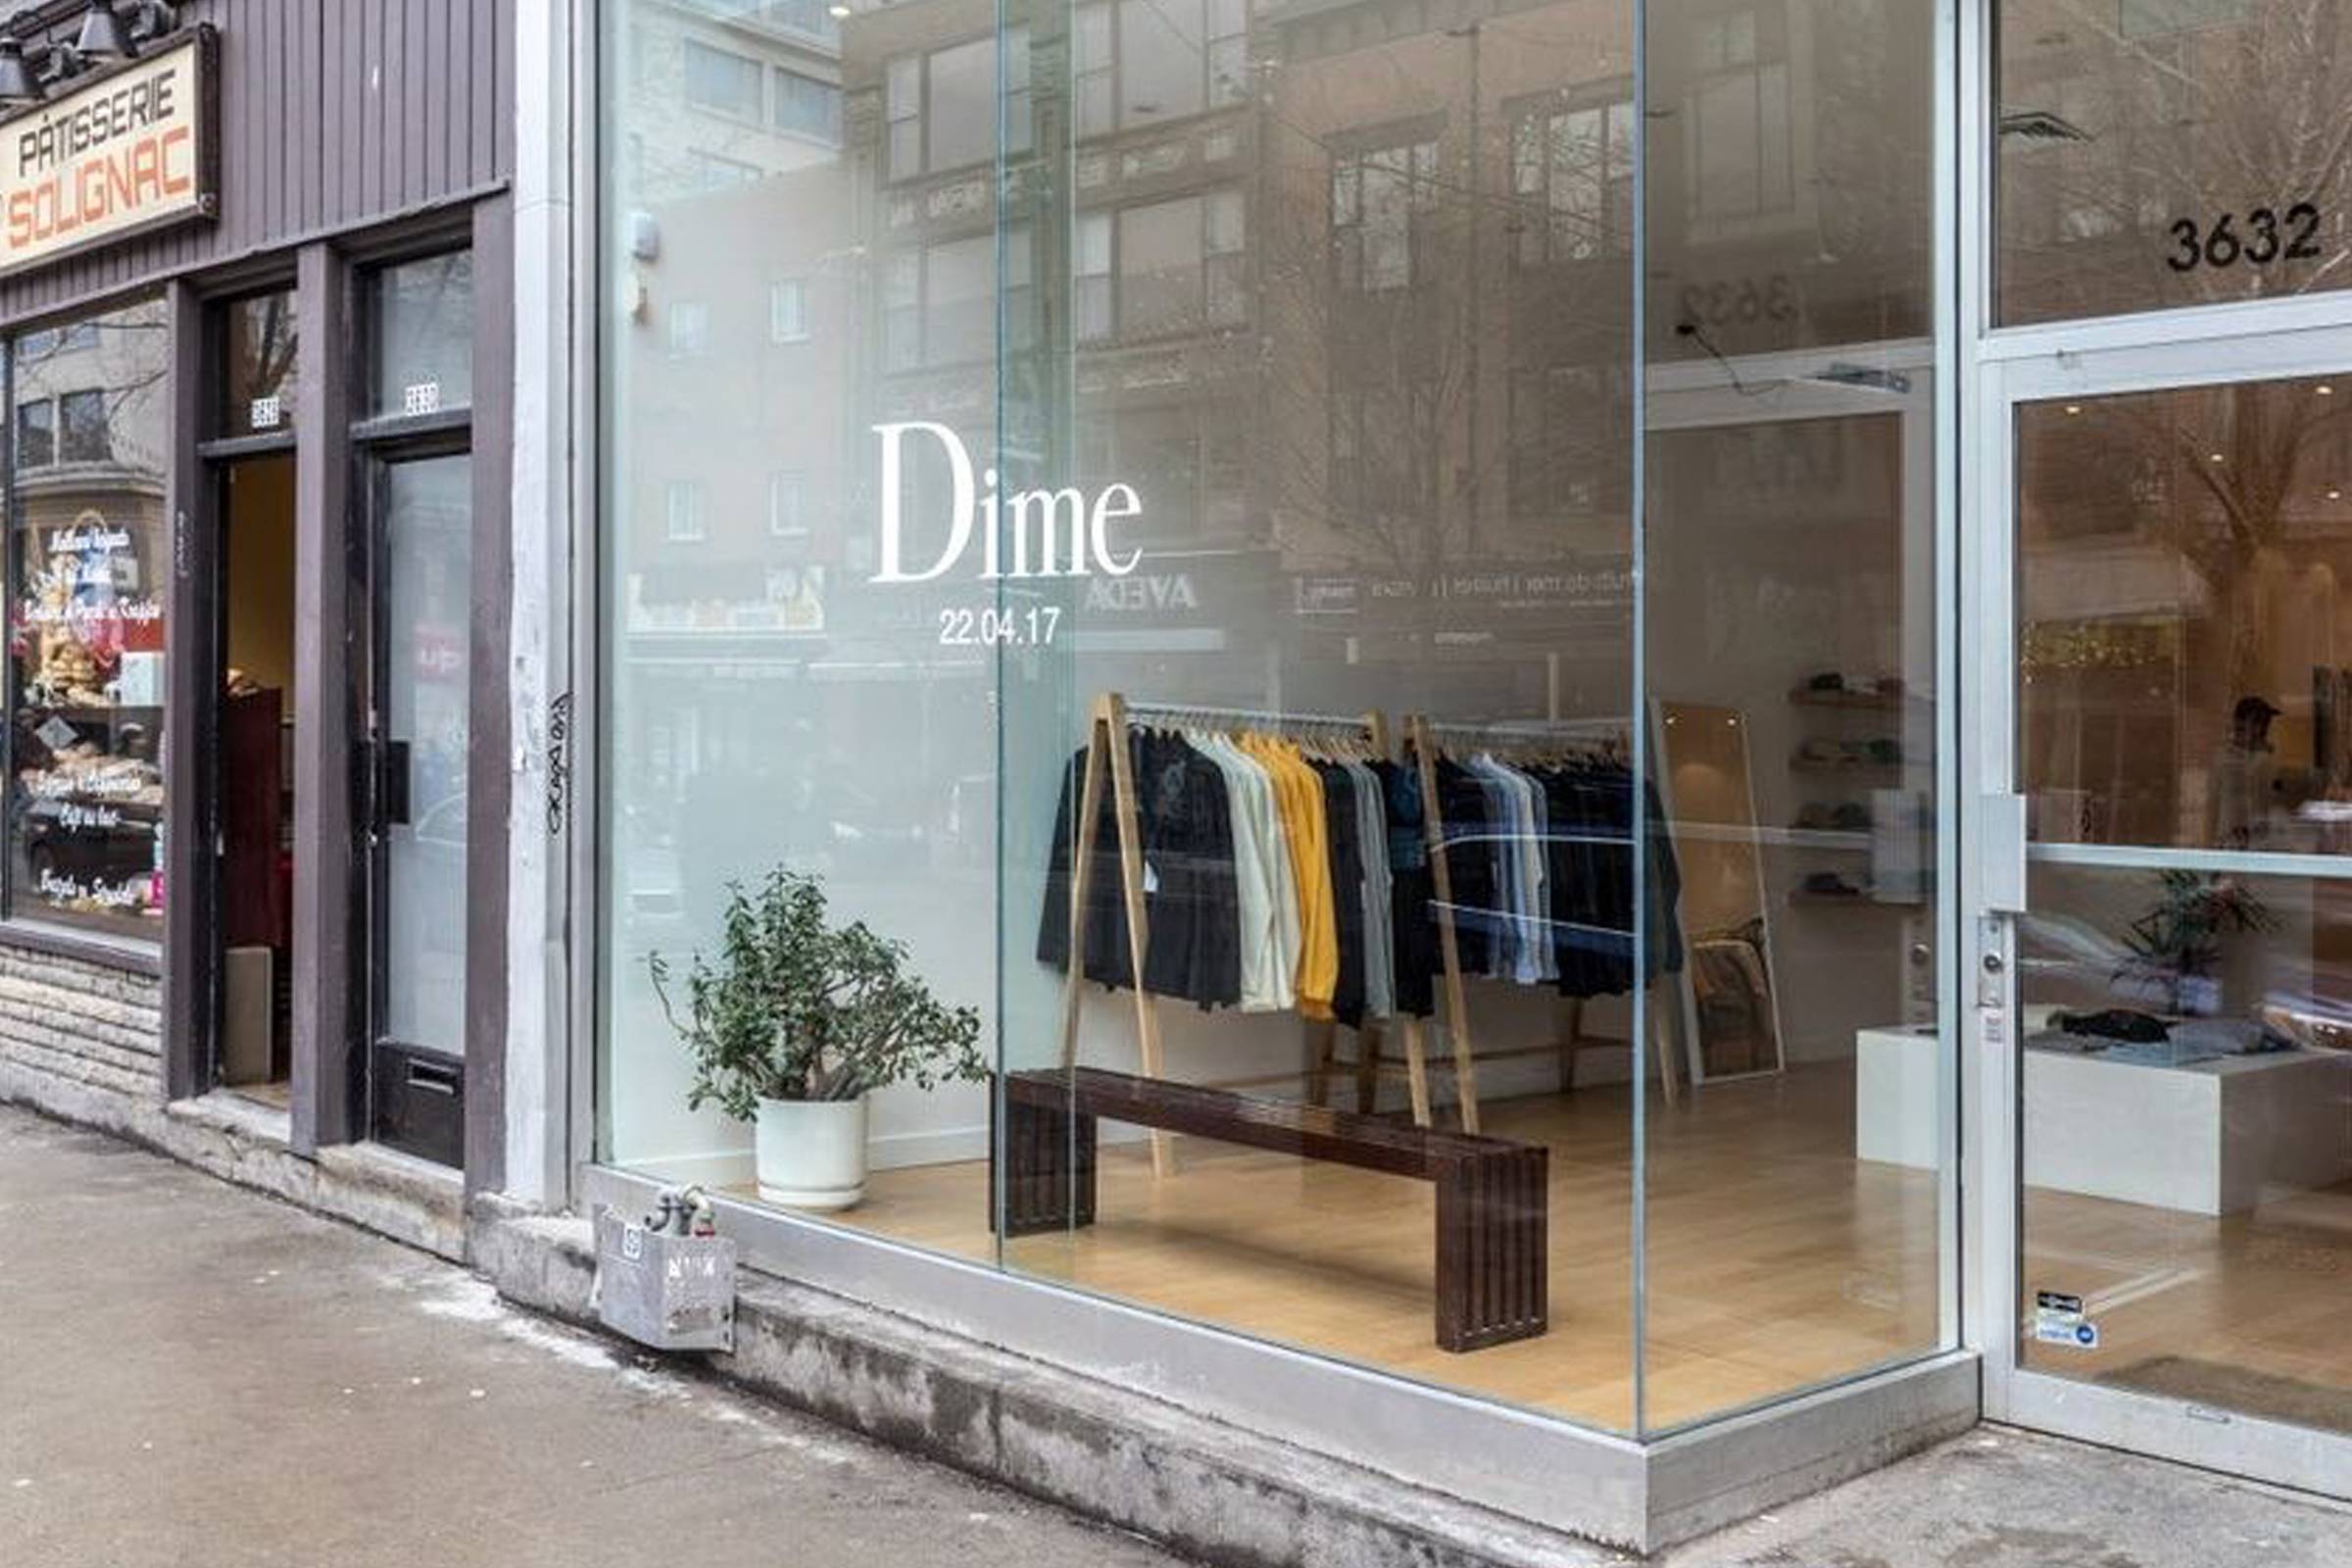 Dime clothing store